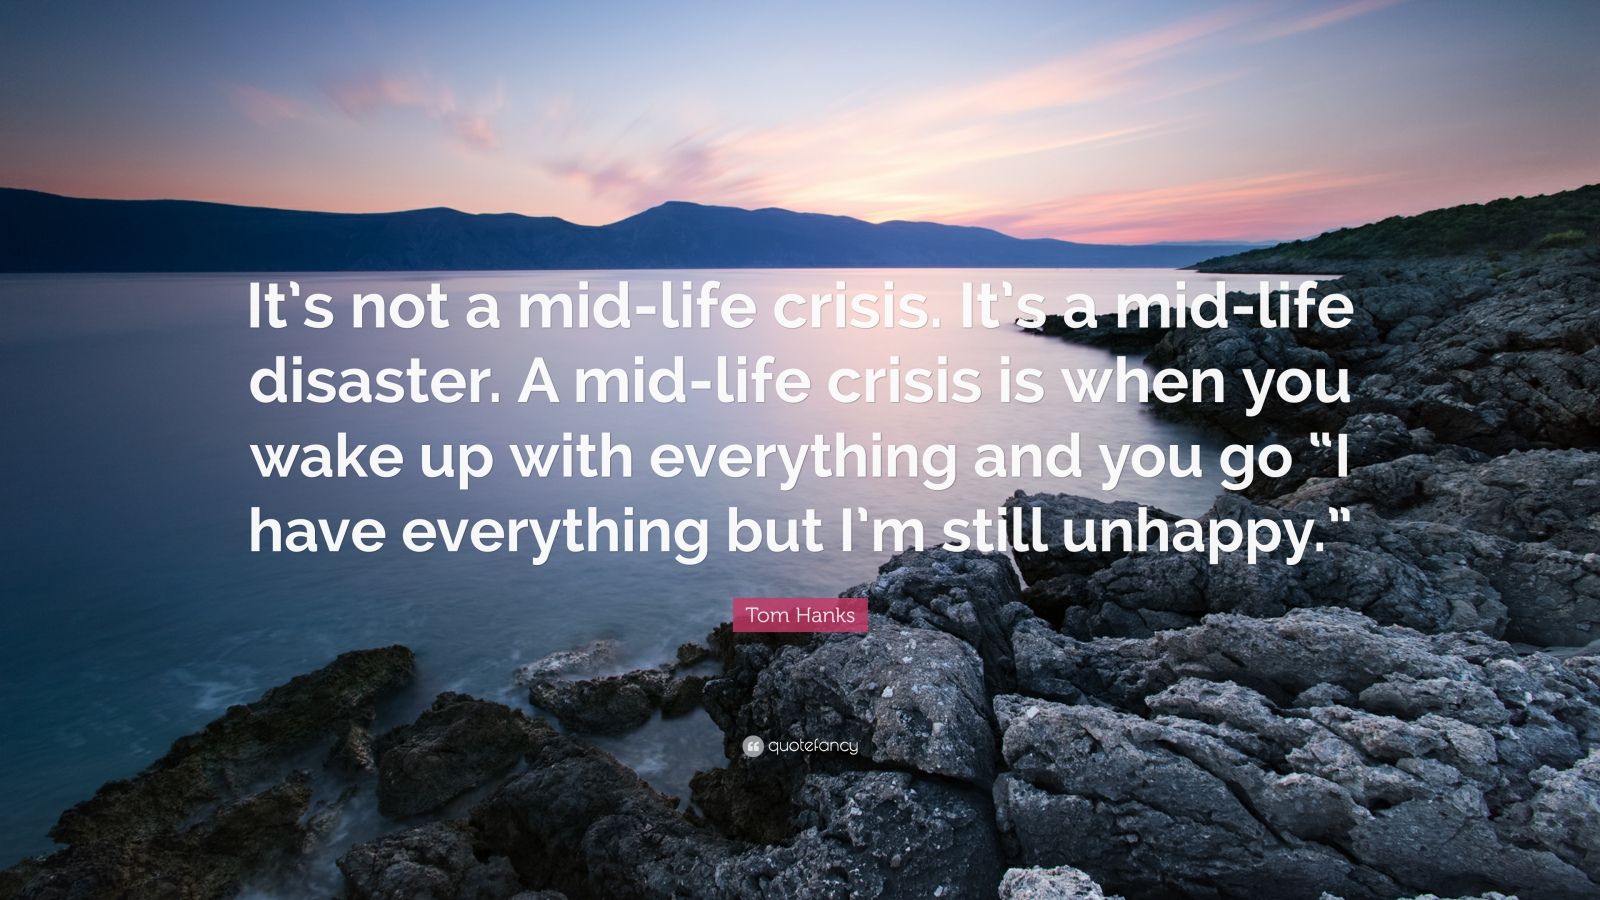 Tom Hanks Quote: "It's not a mid-life crisis. It's a mid-life disaster. A mid-life crisis is ...